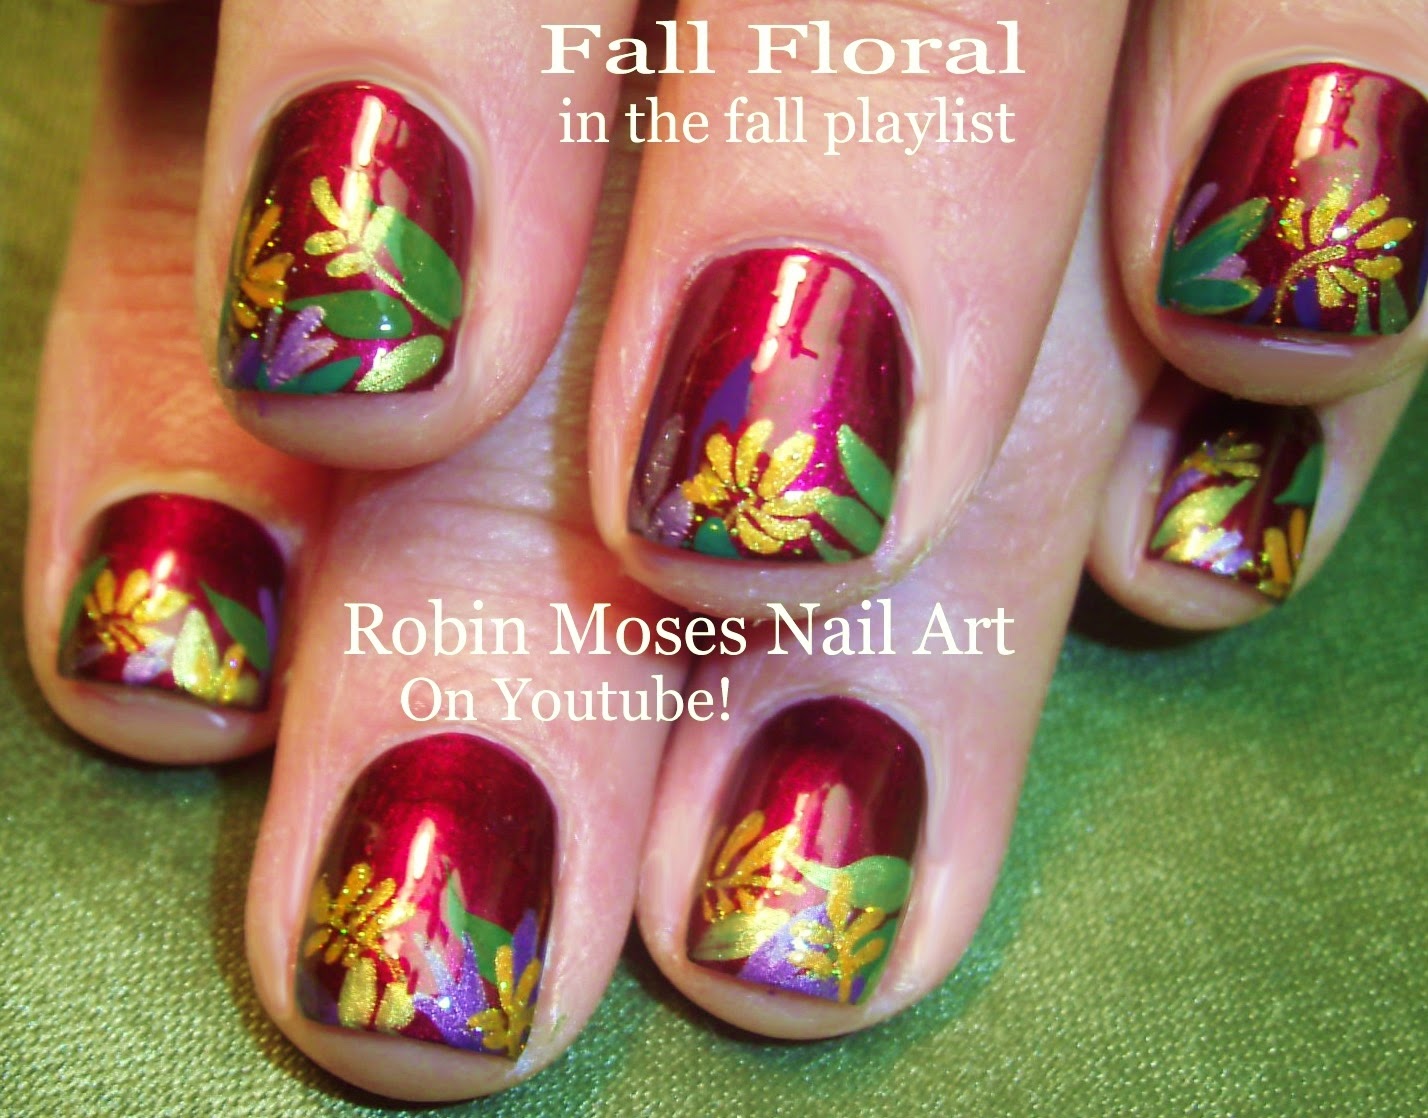 5. Holiday Nail Designs with a Touch of Fall Flair - wide 6